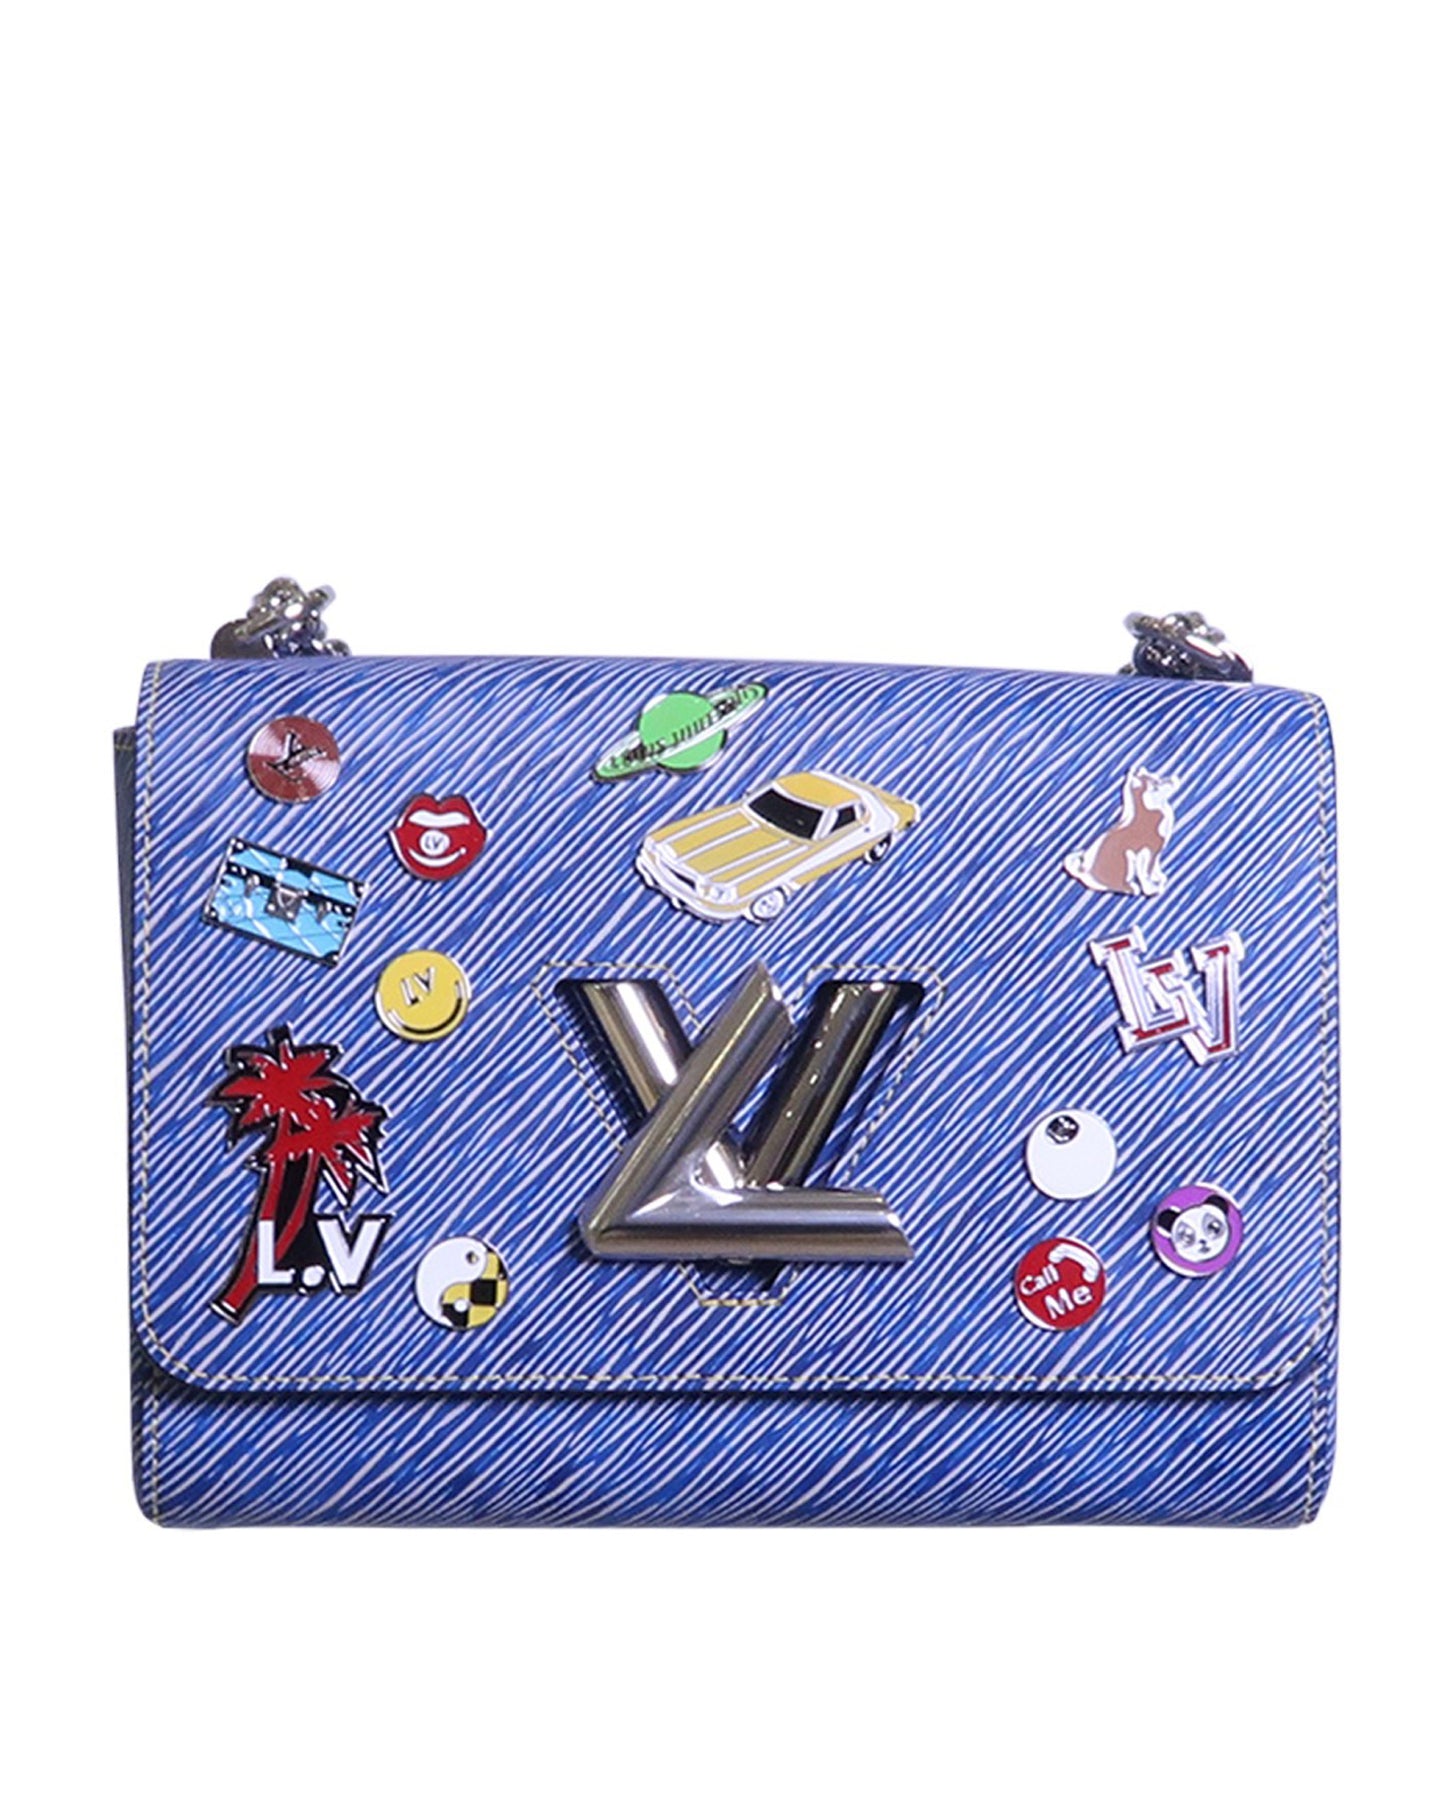 LOUIS VUITTON EPI LEATHER TWIST PINS EMBELLISHED LIMITED EDITION CROSS –  Caroline's Fashion Luxuries